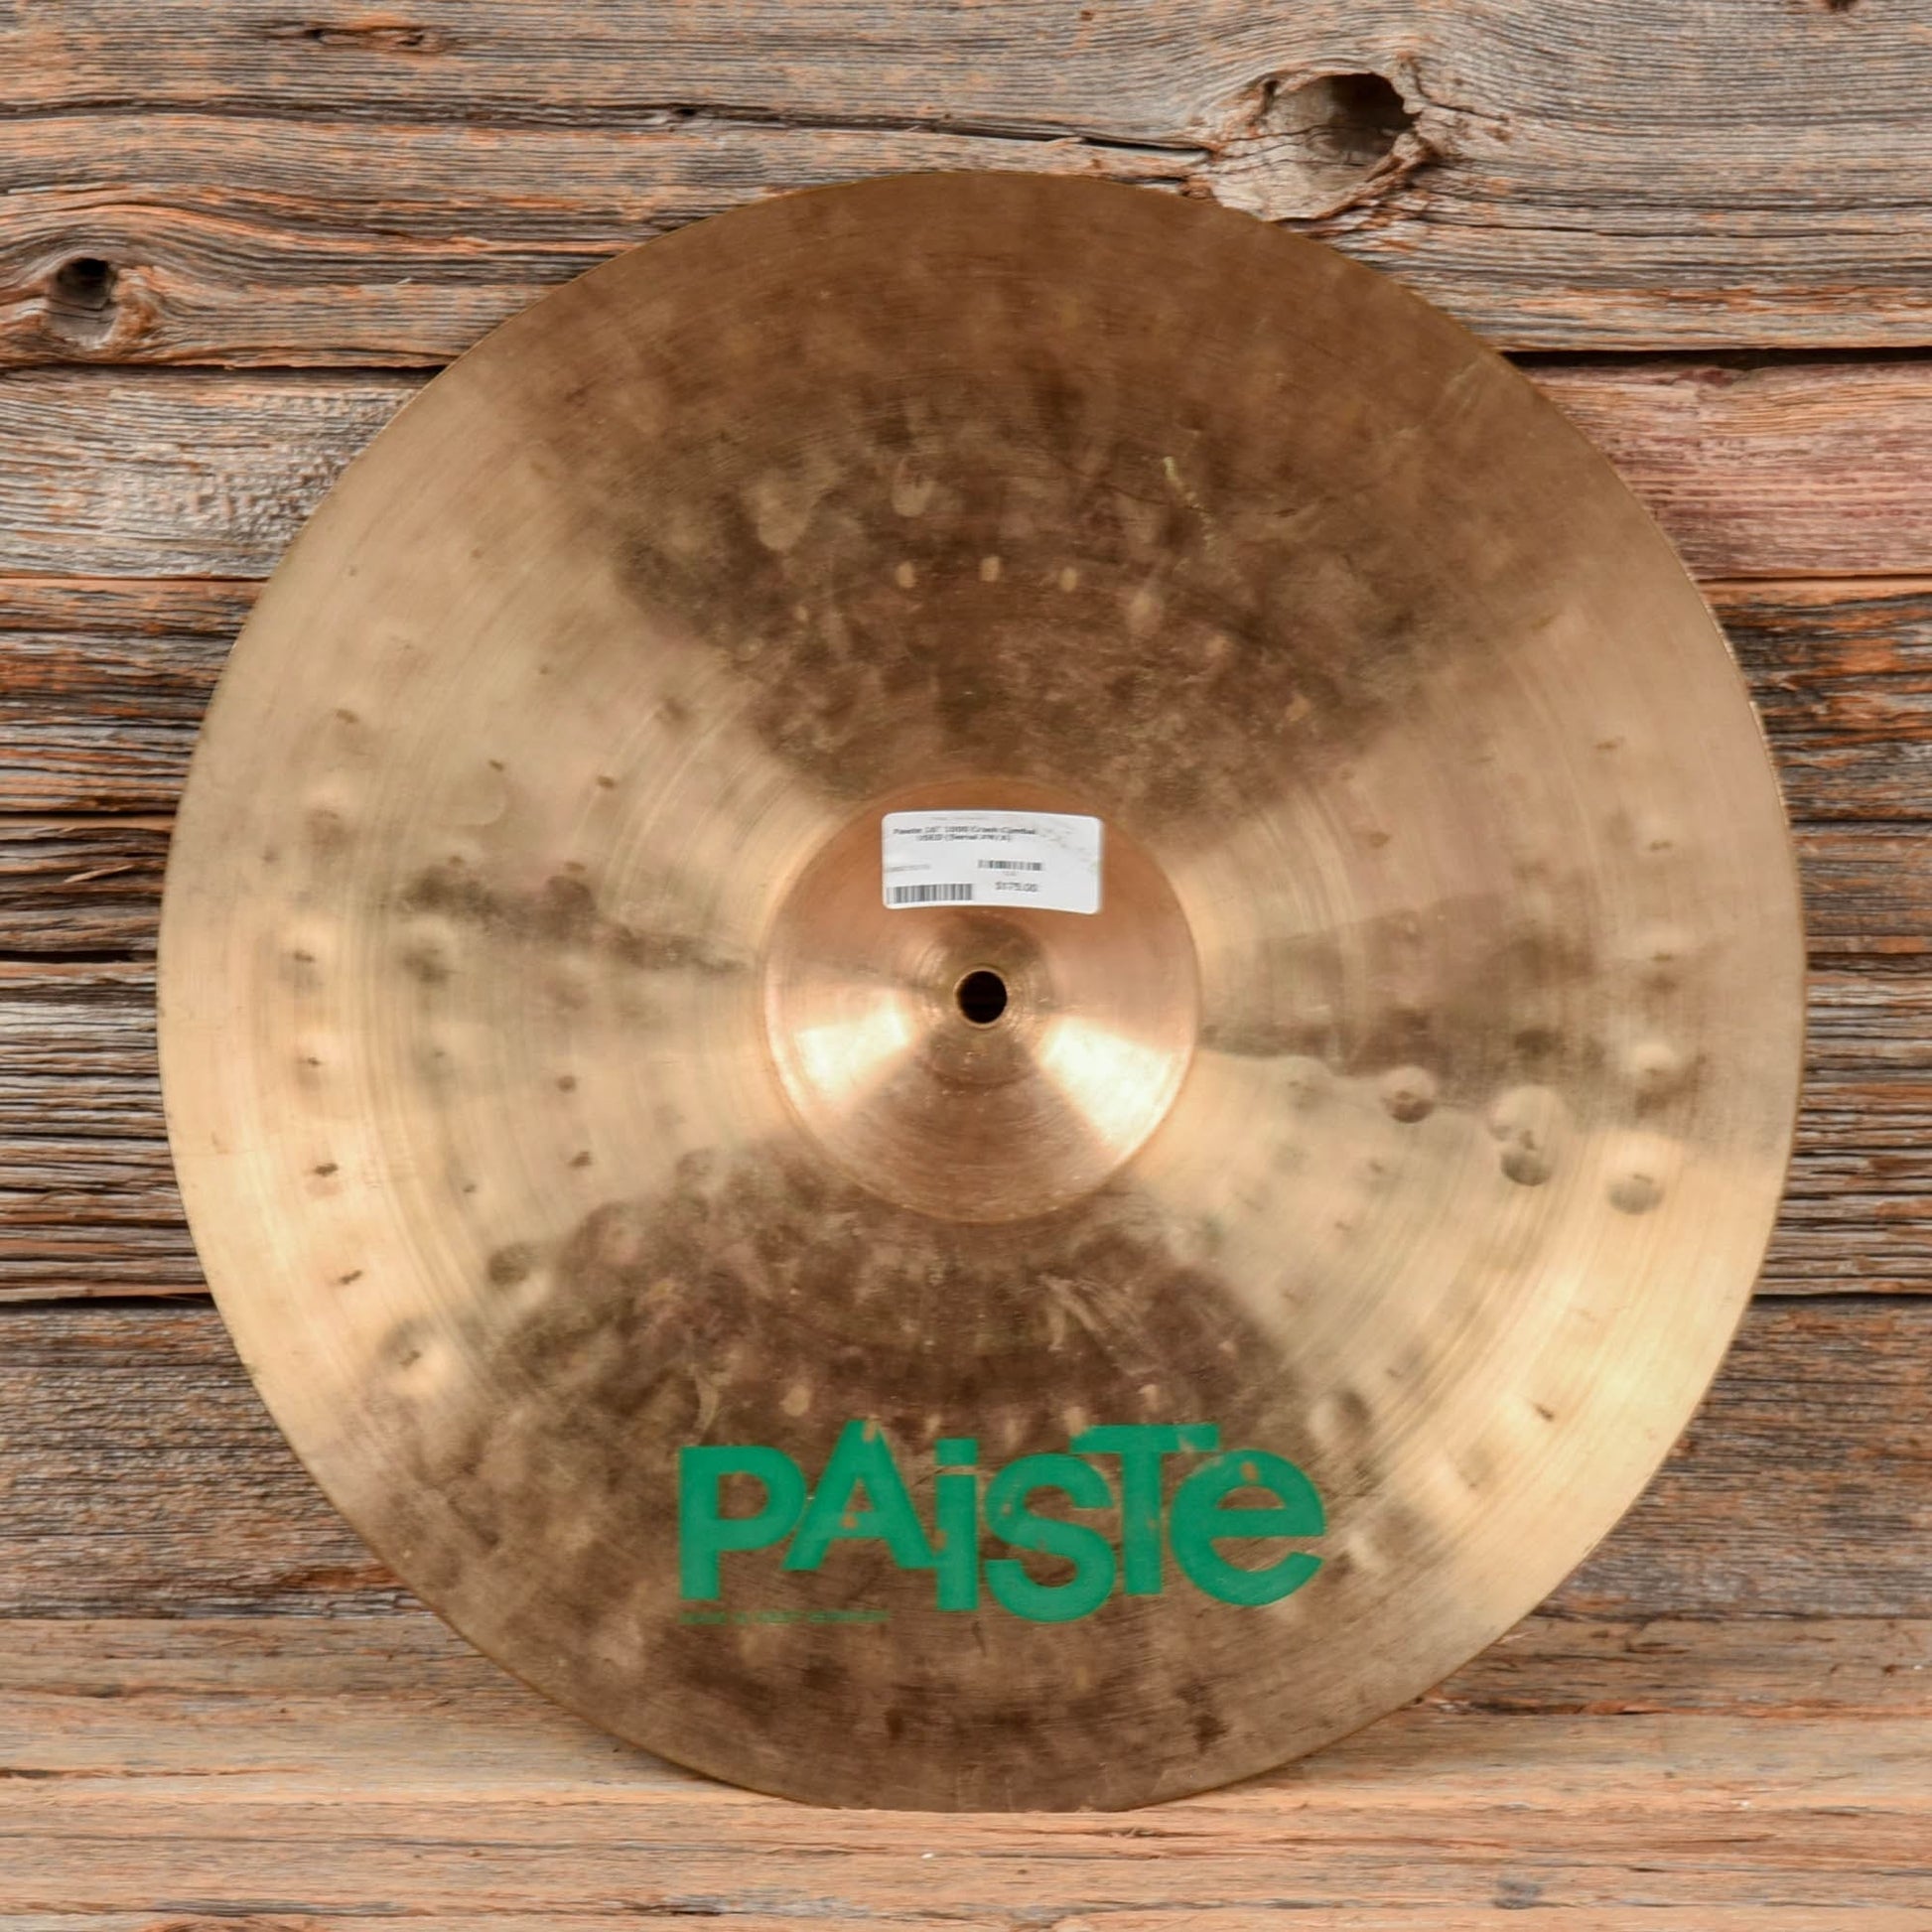 Paiste 16" 1000 Crash Cymbal USED Drums and Percussion